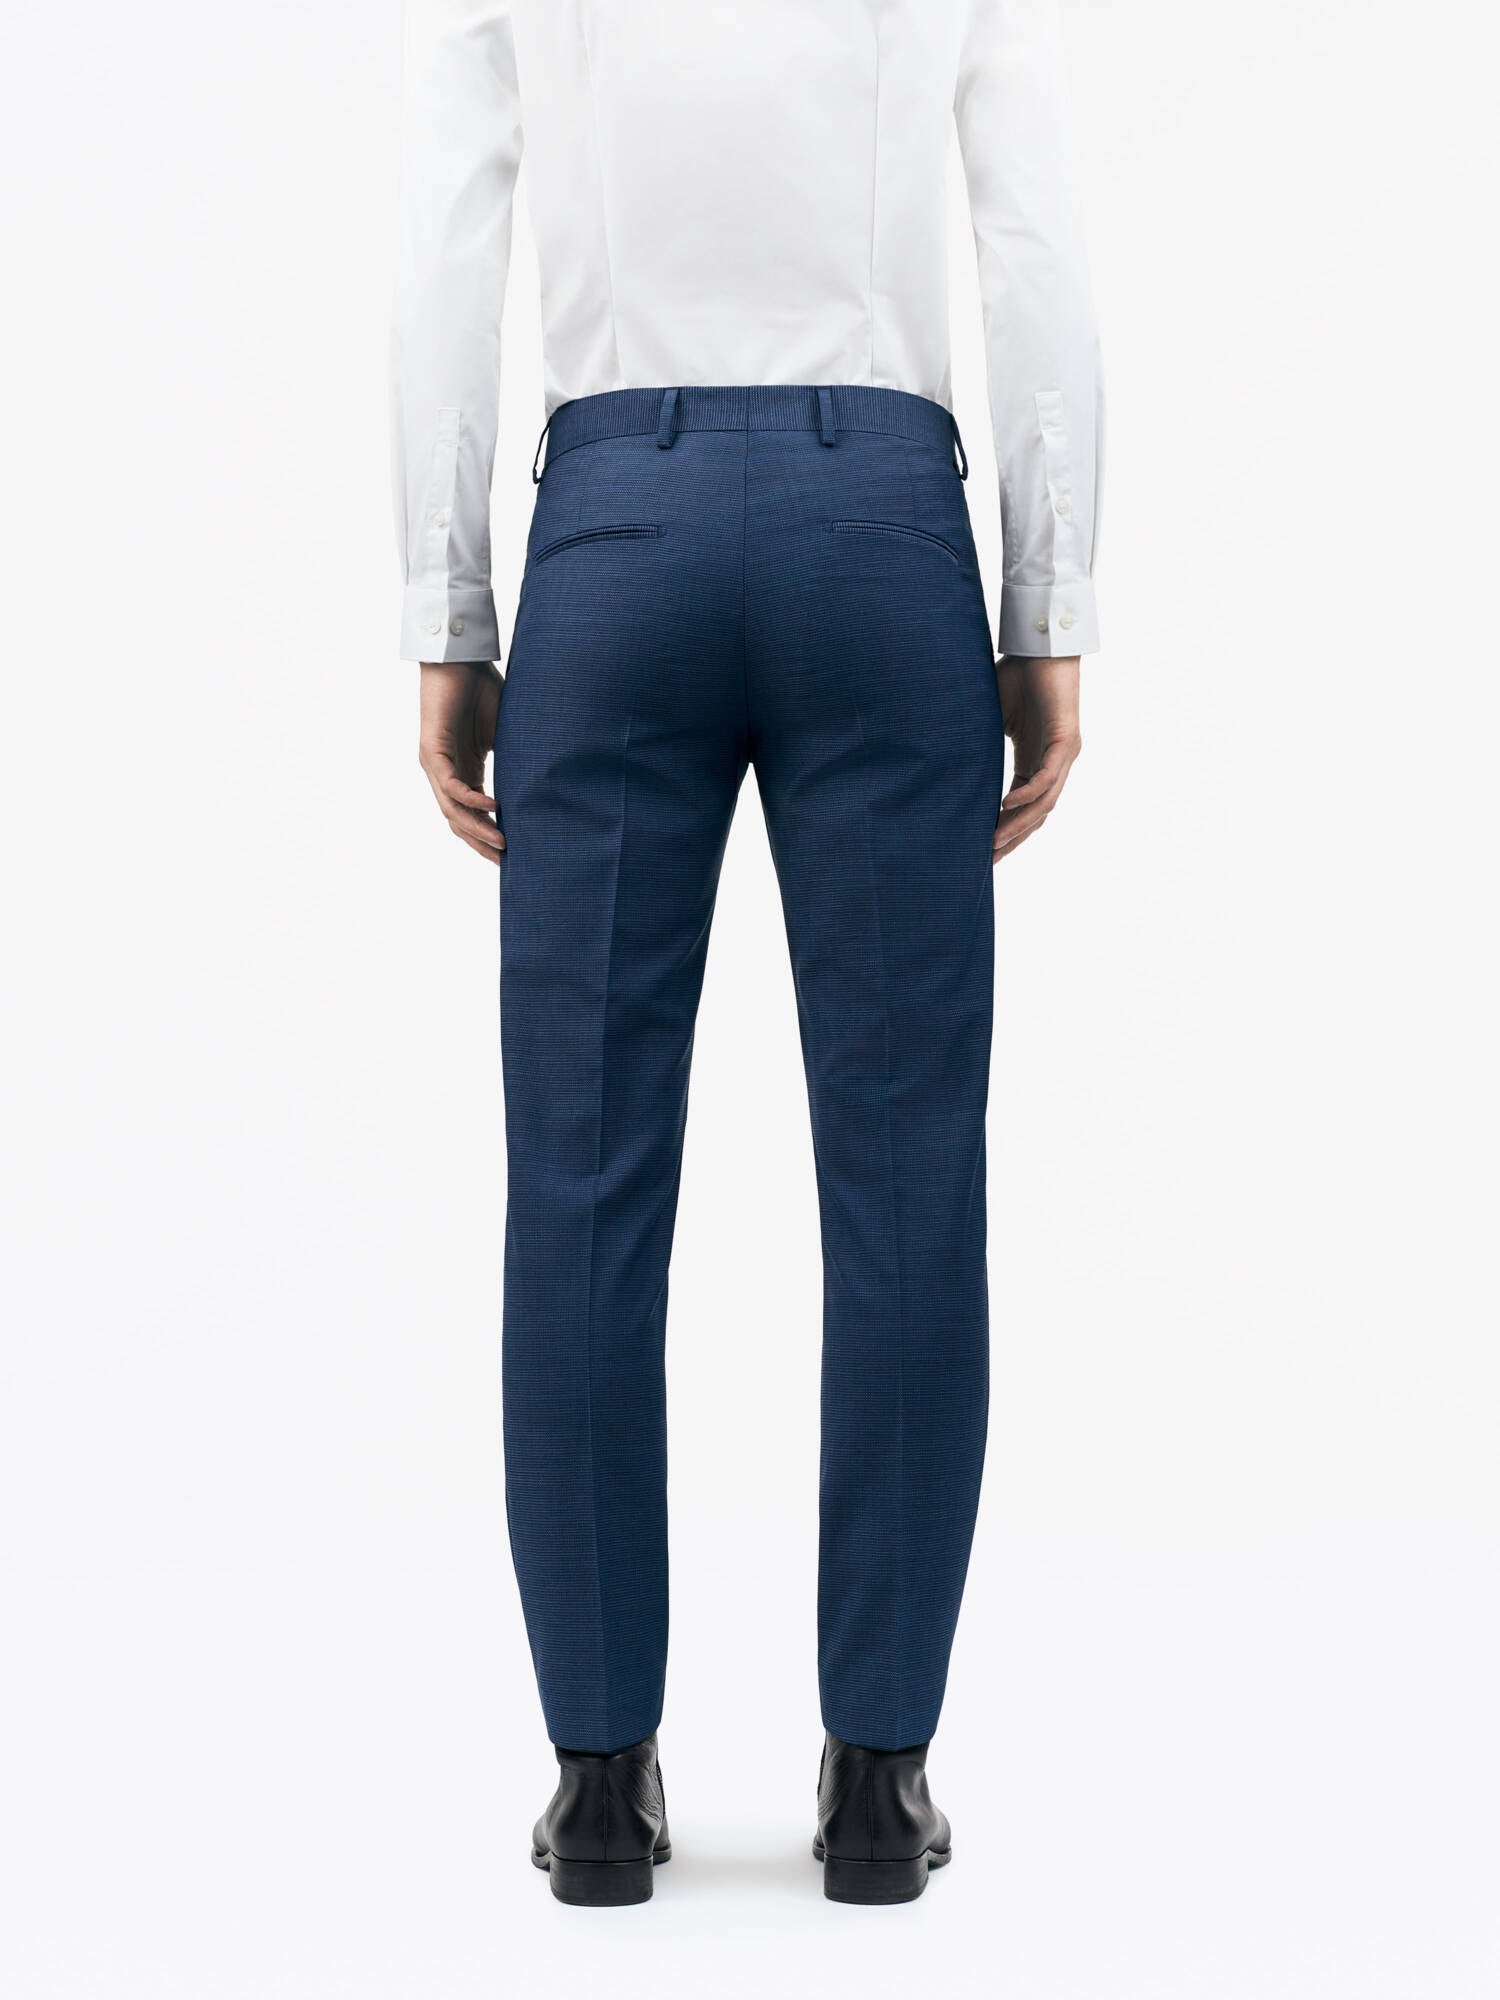 TIGER OF SWEDEN Tenuta Trousers in Blue T71616036 | Shop from eightywingold an official brand partner for Tiger of Sweden Canada and US.